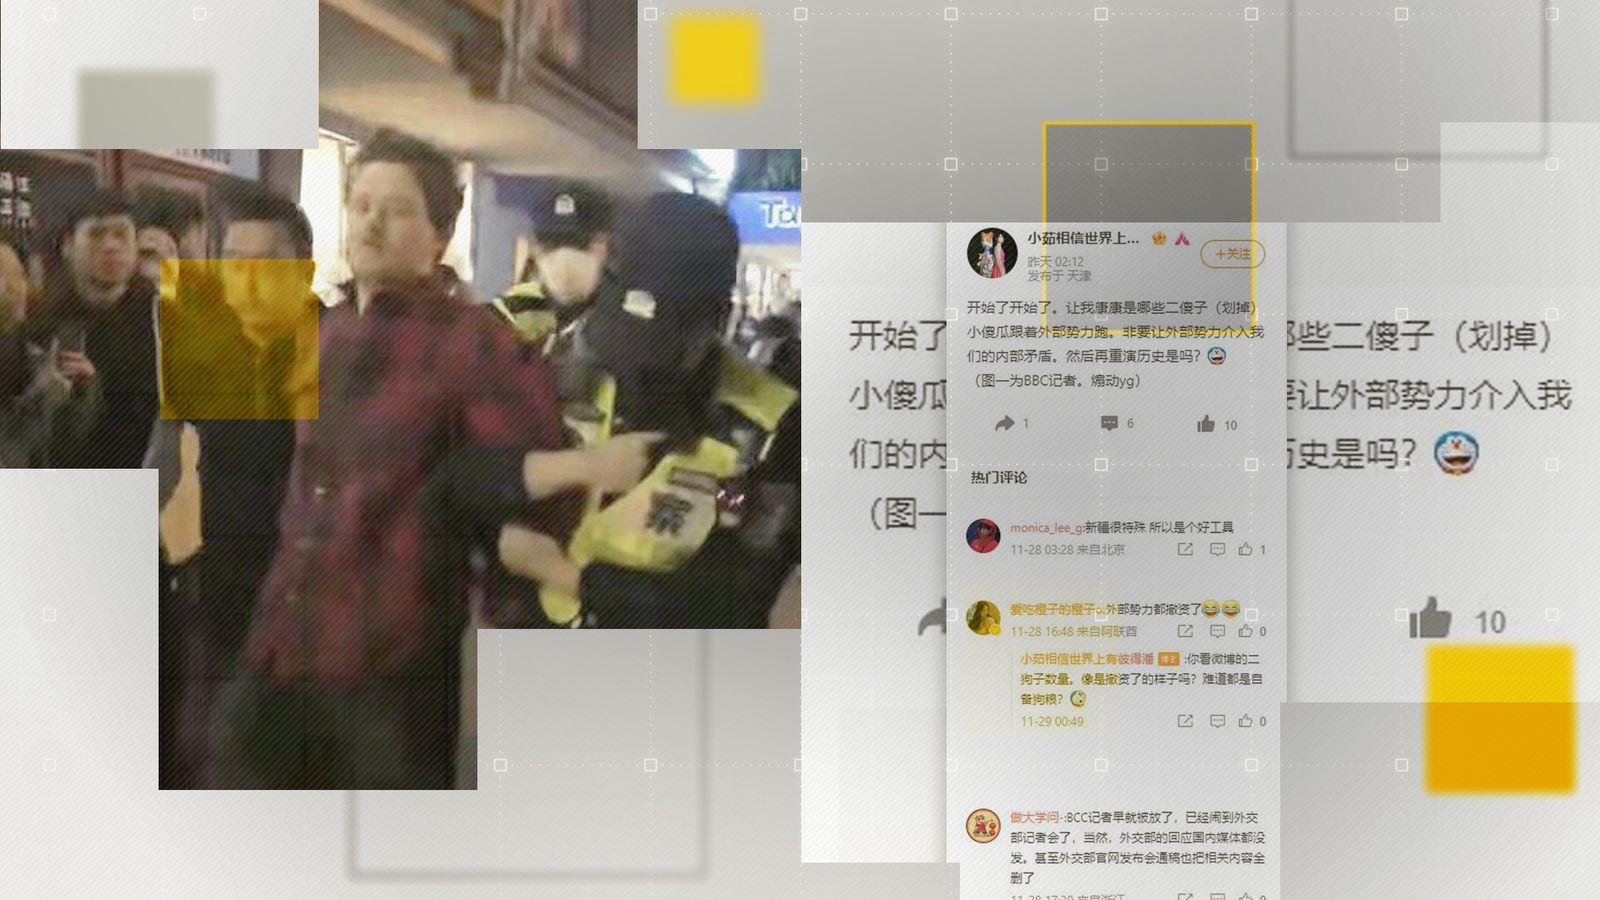 On Chinese social media, America is being blamed for the recent protests